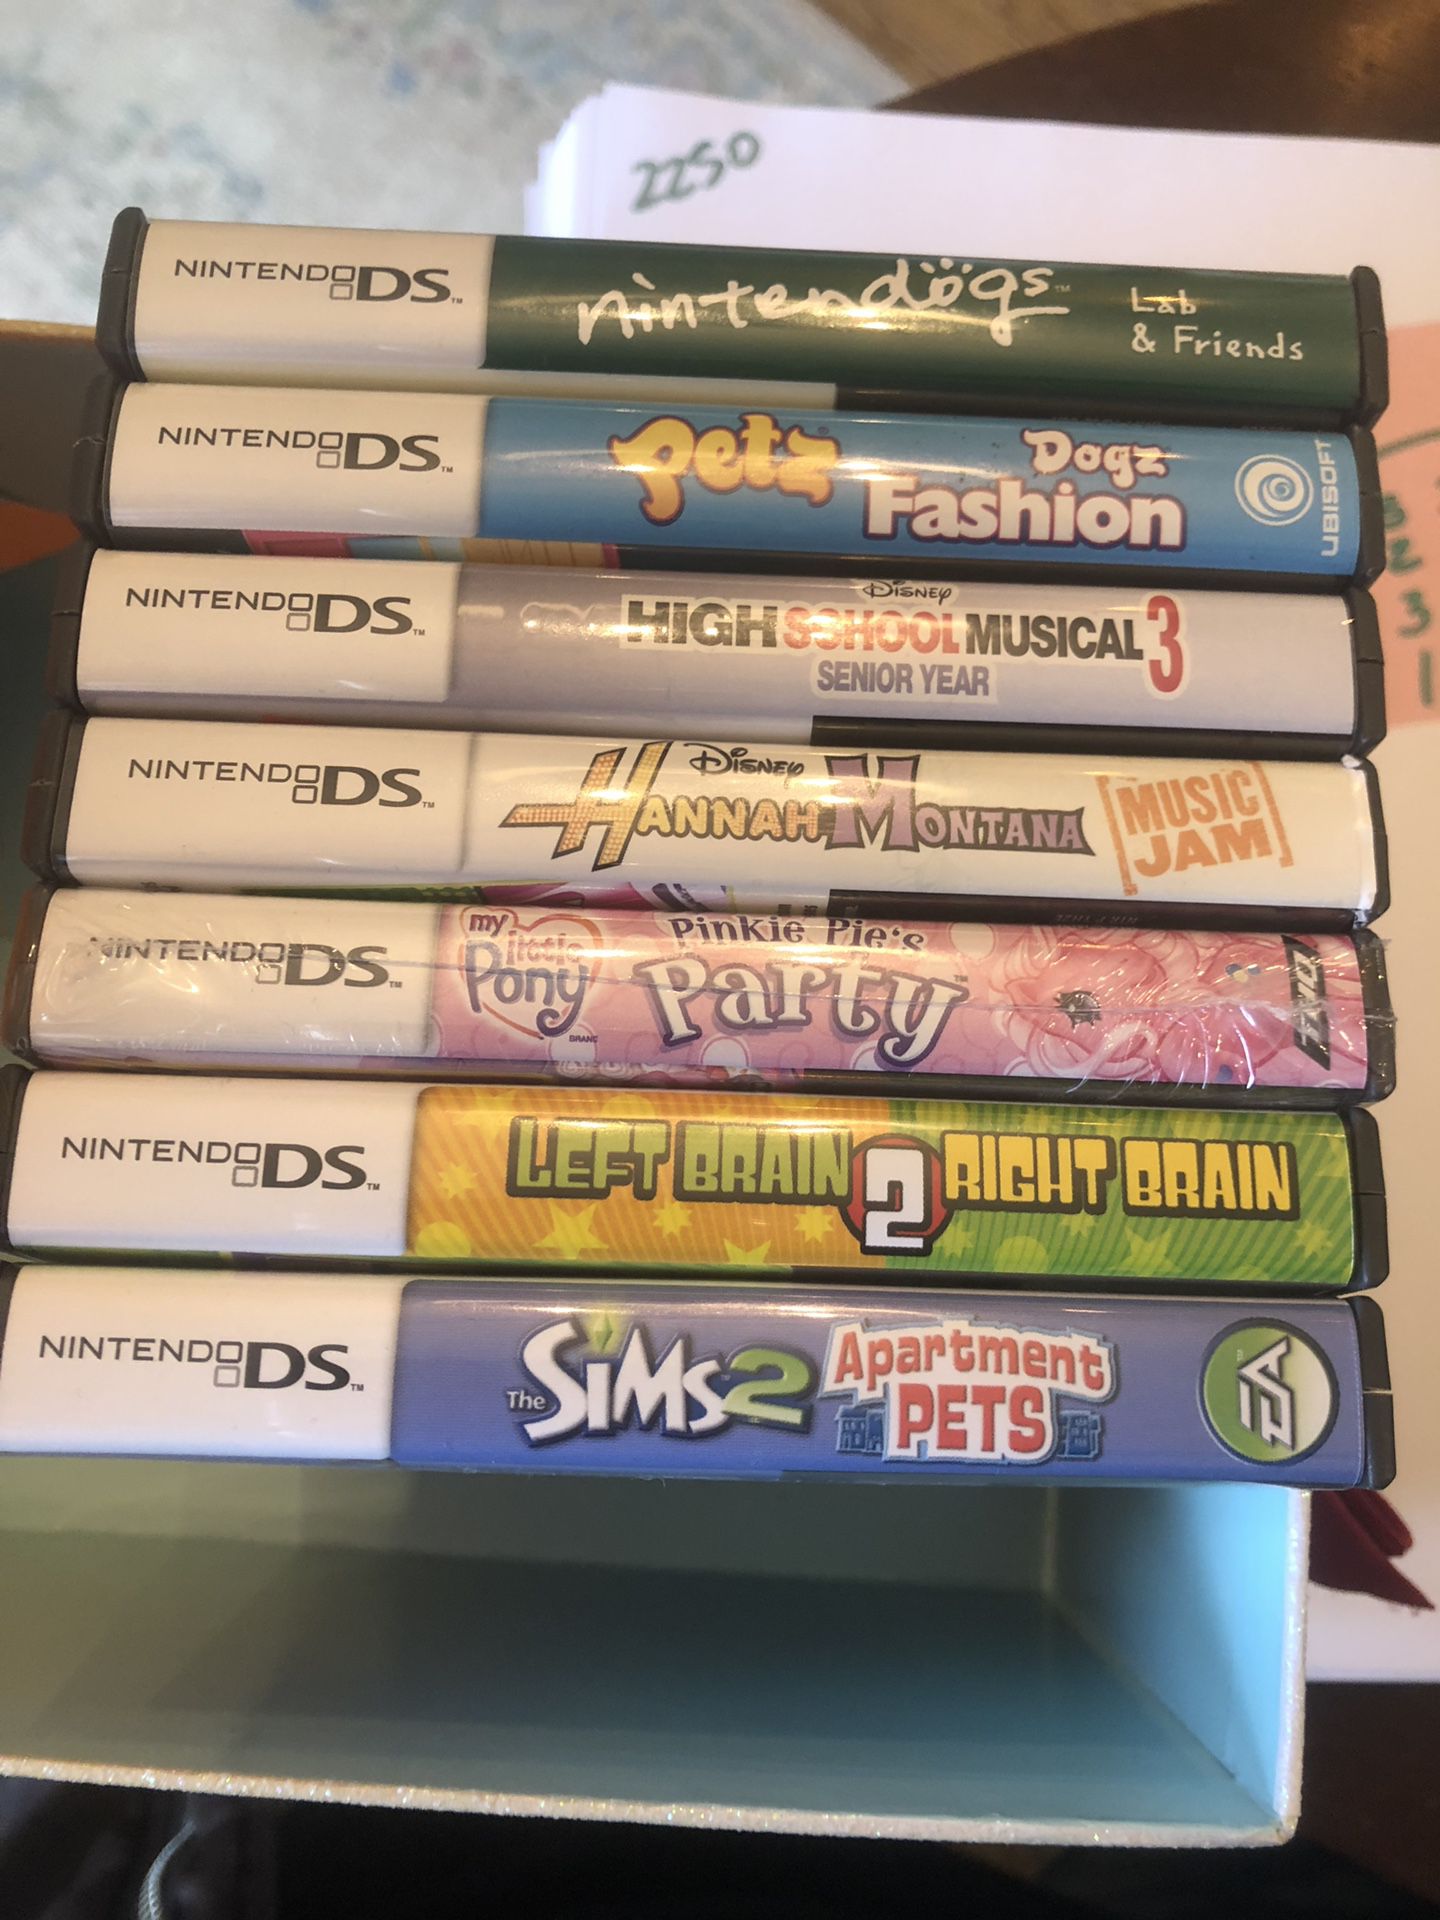 7 Nintendo DS games - must go by 12/9- $2 each